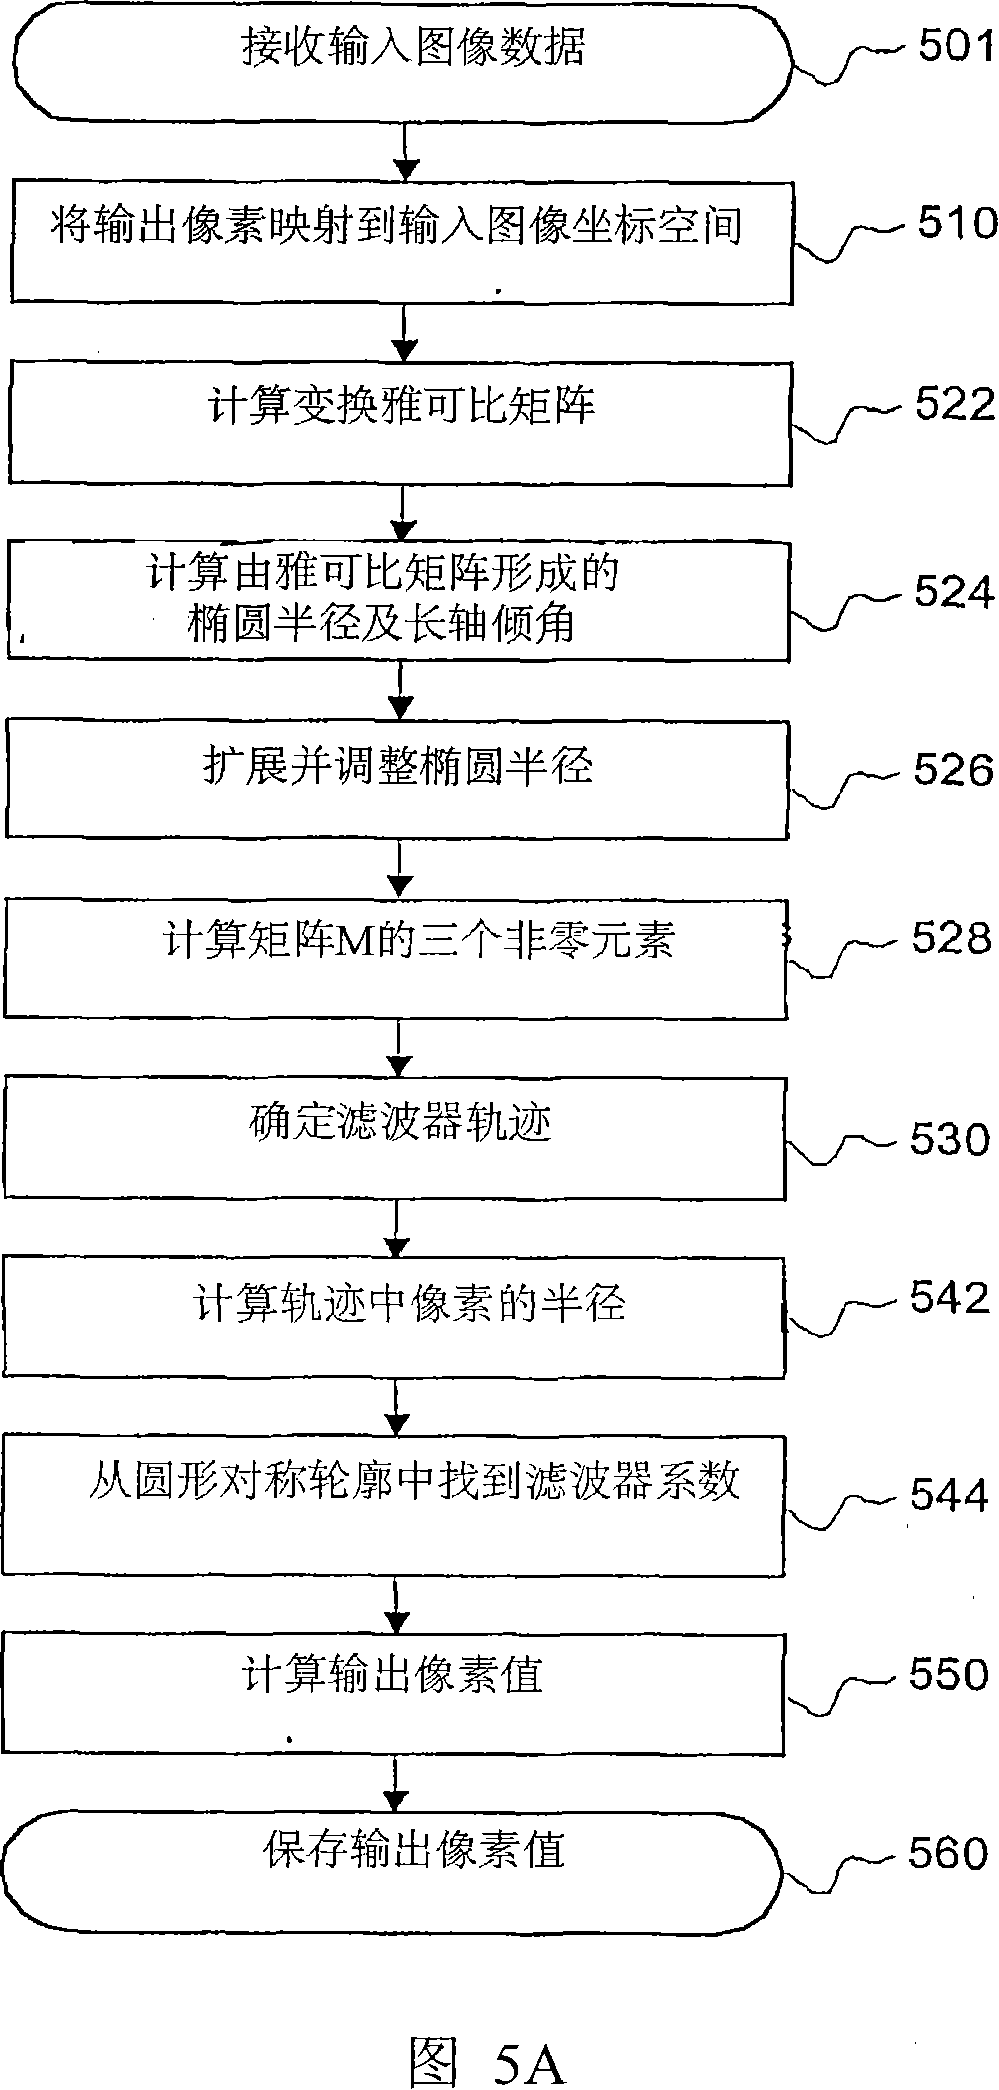 Single channel image deformation system and method using anisotropic filtering